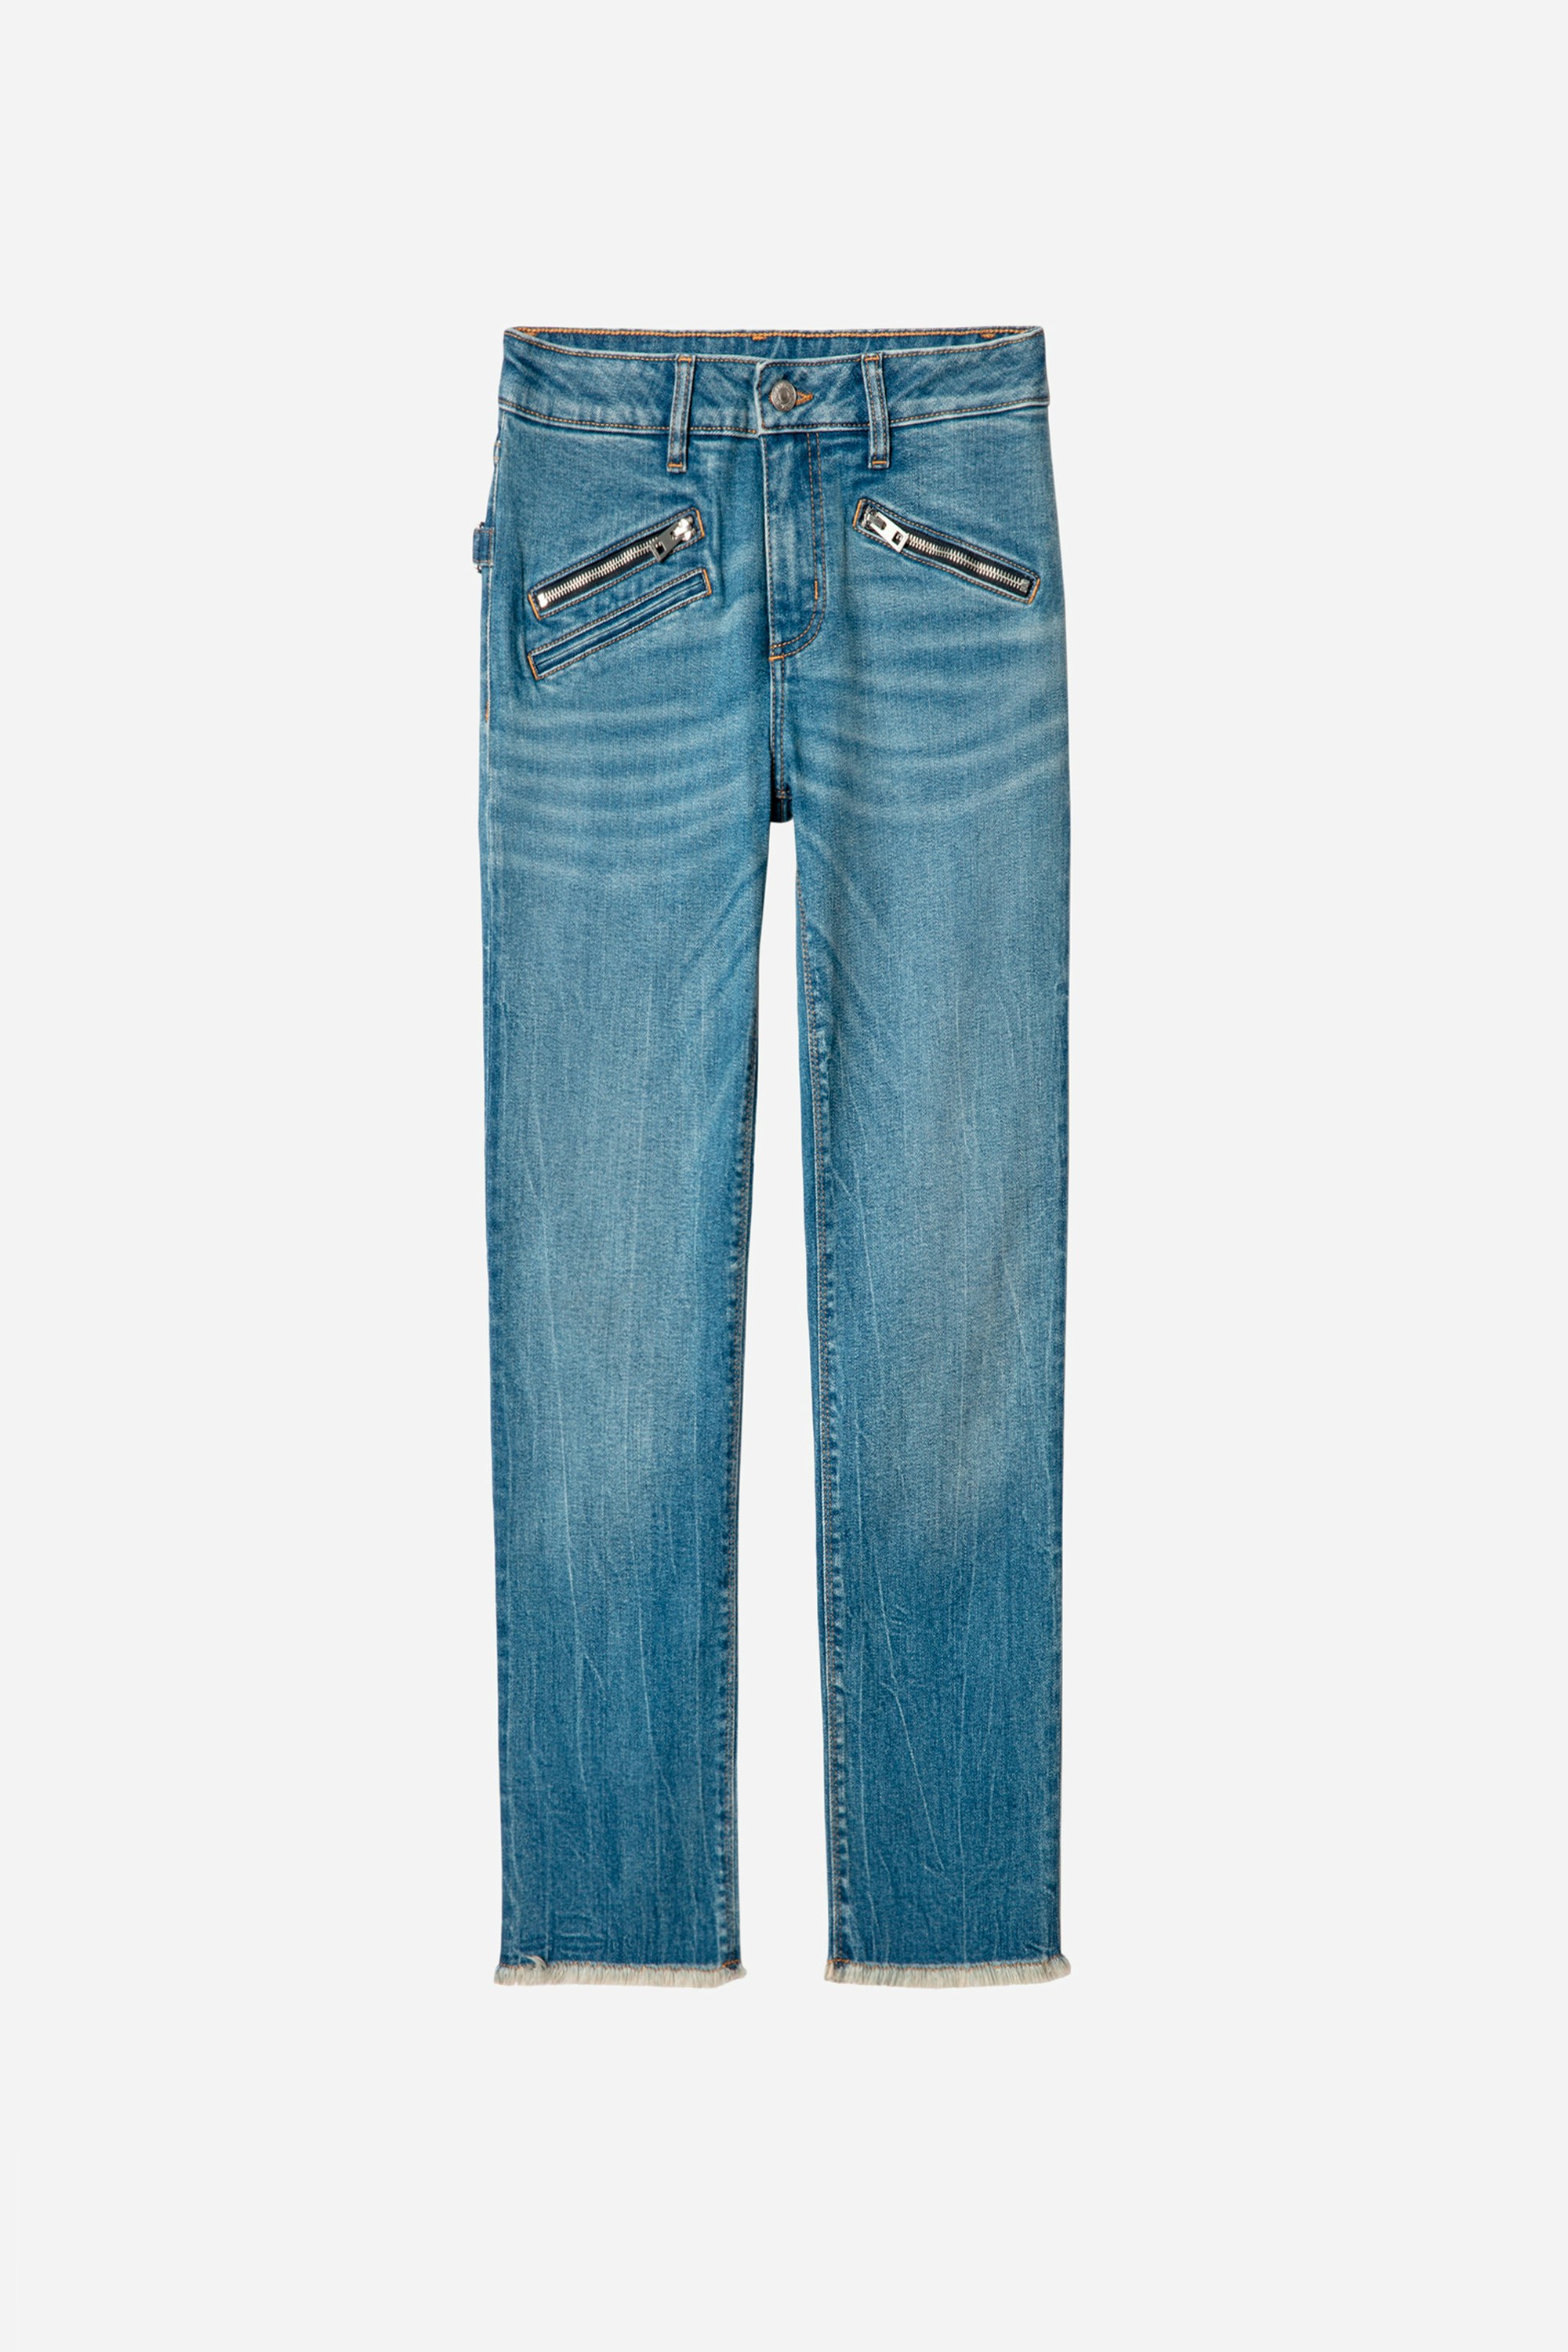 Ava ジーンズ - Women's blue washed slim jeans